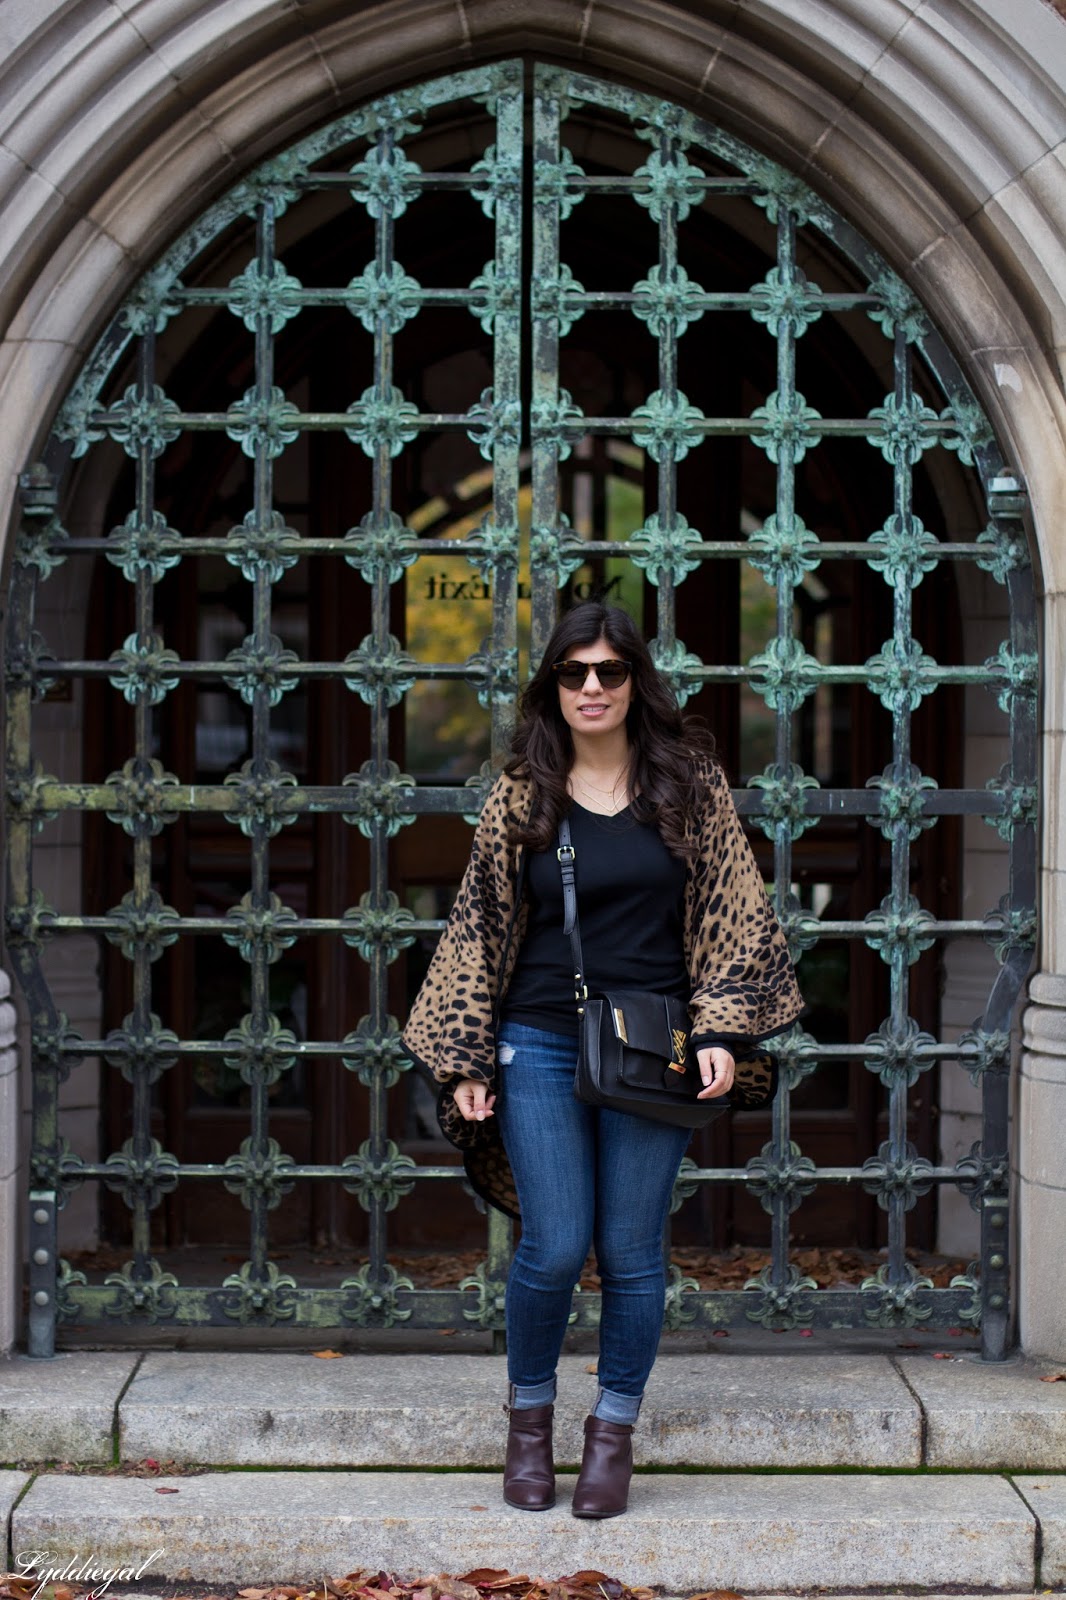 Electing leopard - Chic on the Cheap | Connecticut based style blogger ...